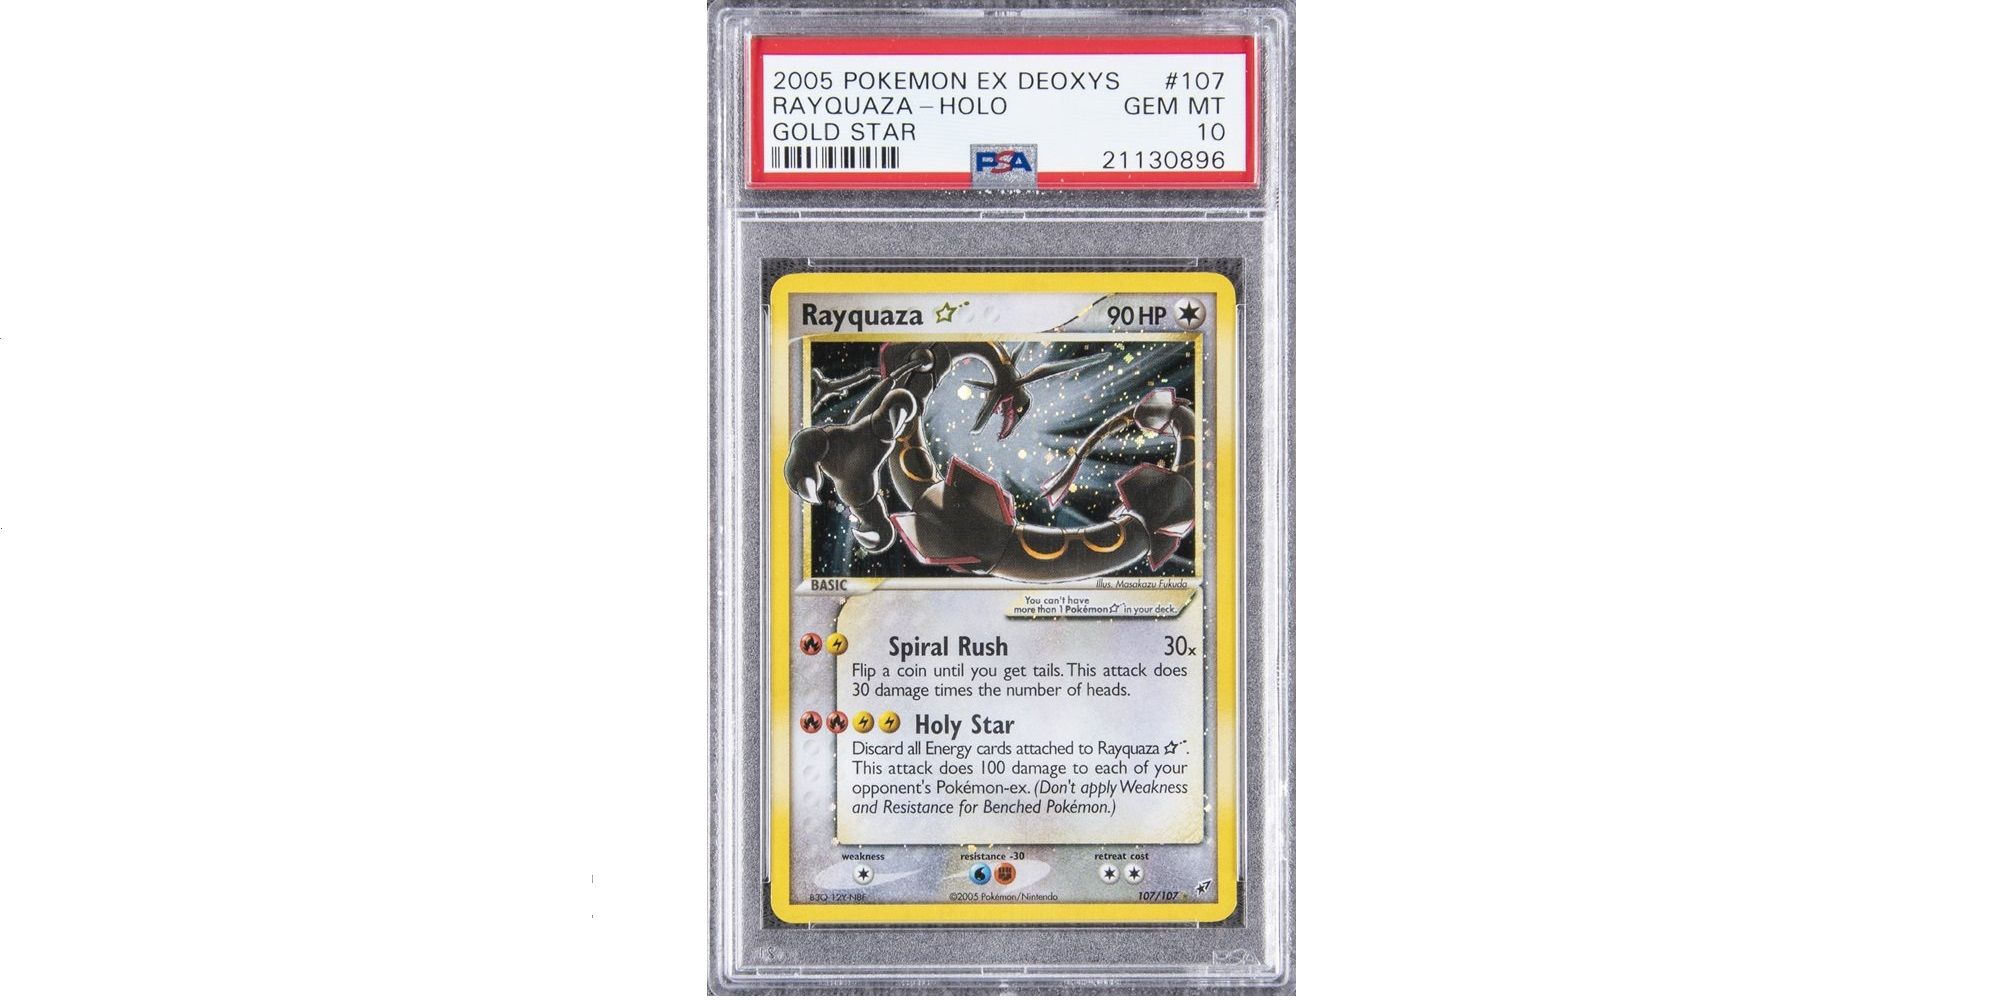 A PSA 10 Holo Rayquaza Gold Star EX Deoxys.